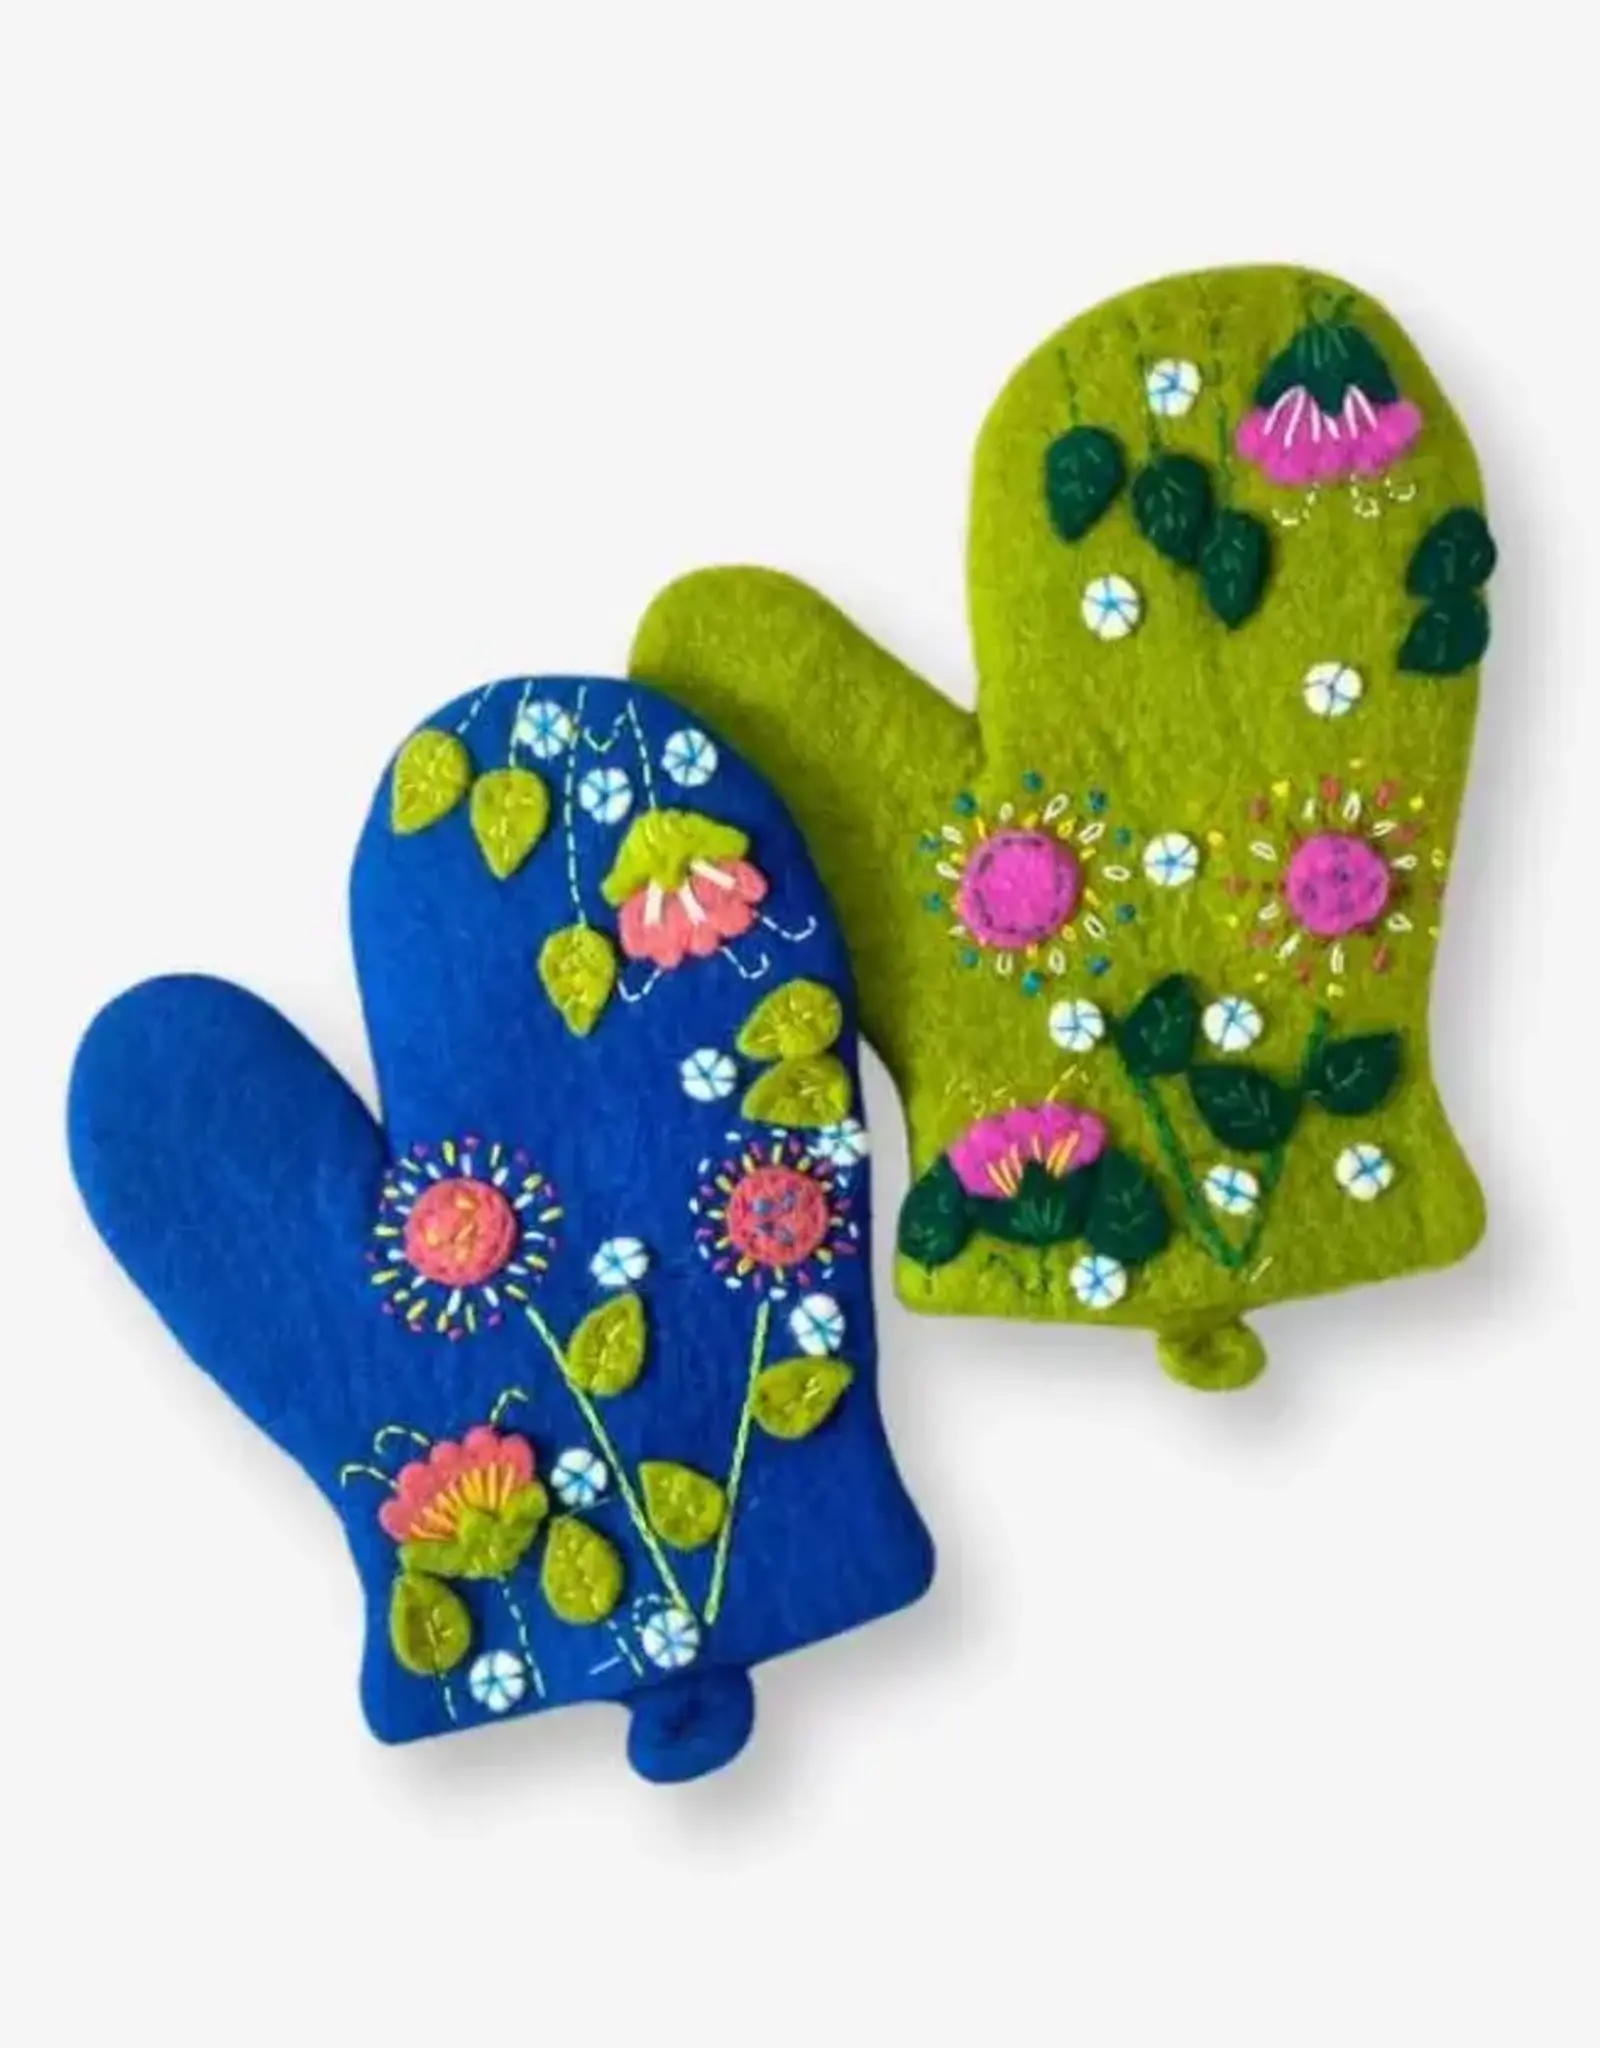 Nepal Felt Oven Mitt  With Embroied Leaves - Nepal